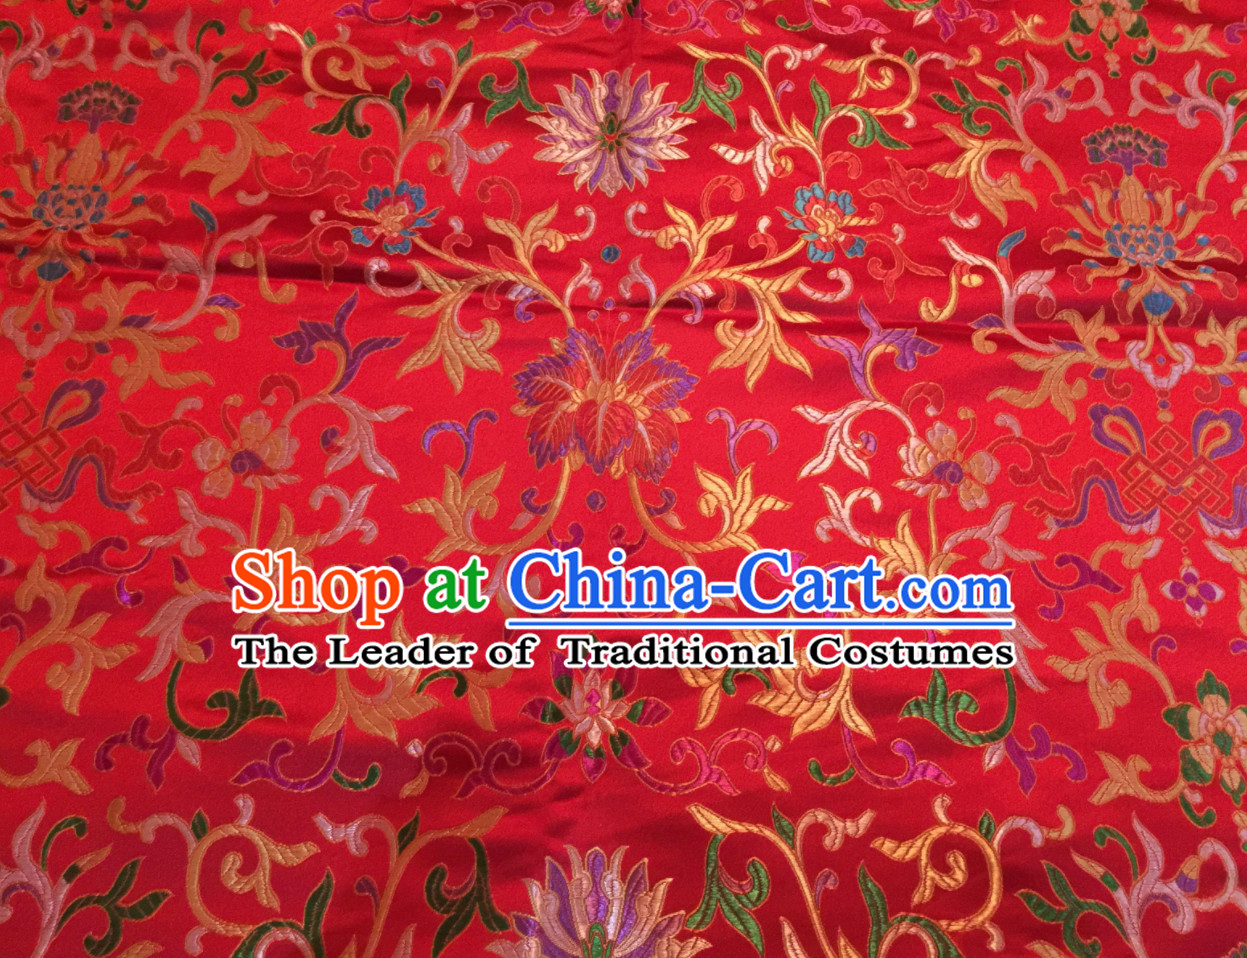 Red Color Chinese Traditional Pattern Design Brocade Fabric Silk Fabric Chinese Fabric Asian Material